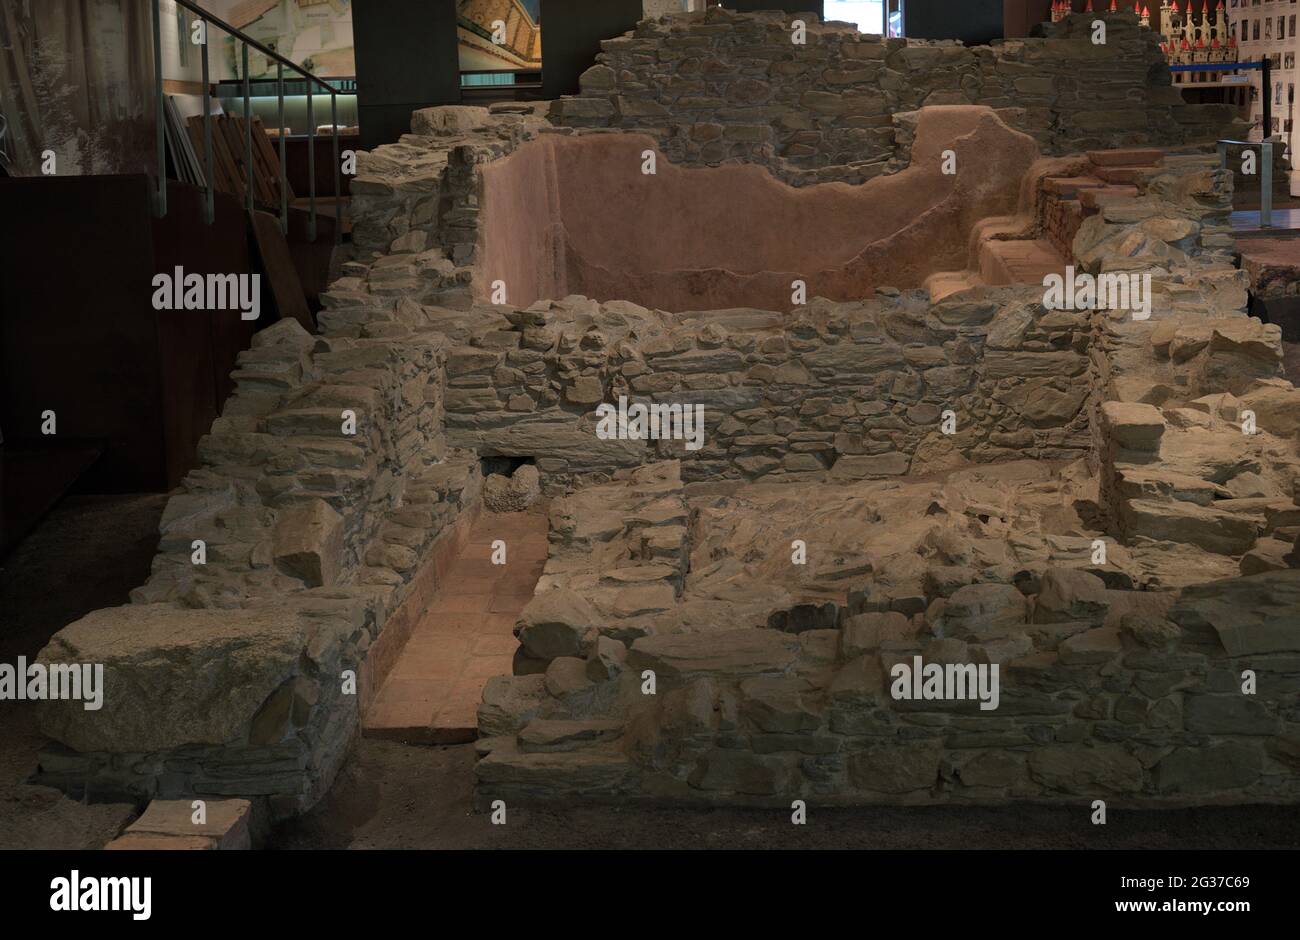 Spain, Galicia, La Coruña province. Archaeological Museum of Cambre. Roman Villa of Cambre. Dated between the 2nd and 4th centuries AD. View of the archaeological remains. Stock Photo